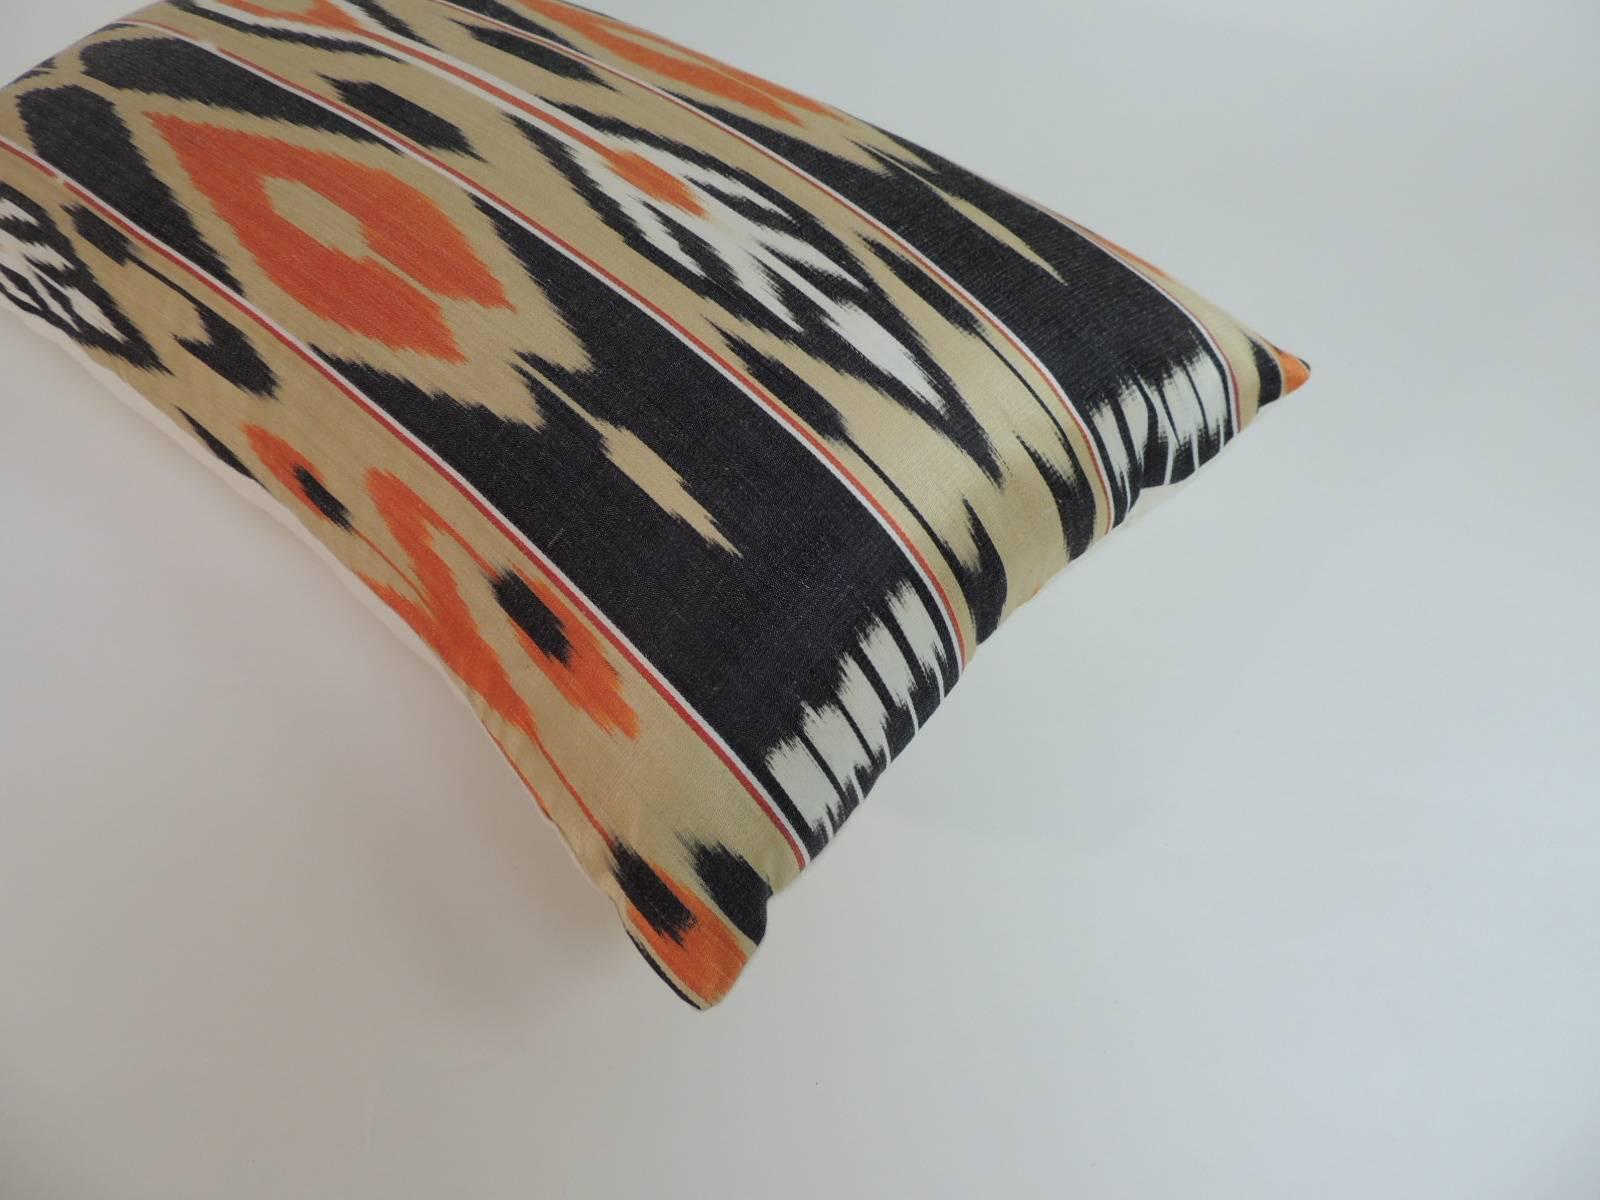 Offered by the Antique Textiles Galleries:

Pair of vintage silk Ikat bolsters decorative pillows. Hand-crafted with a textile from India, 1960s: an Ikat striped pattern textile in shades of black, gold, orange and white with natural linen backings.